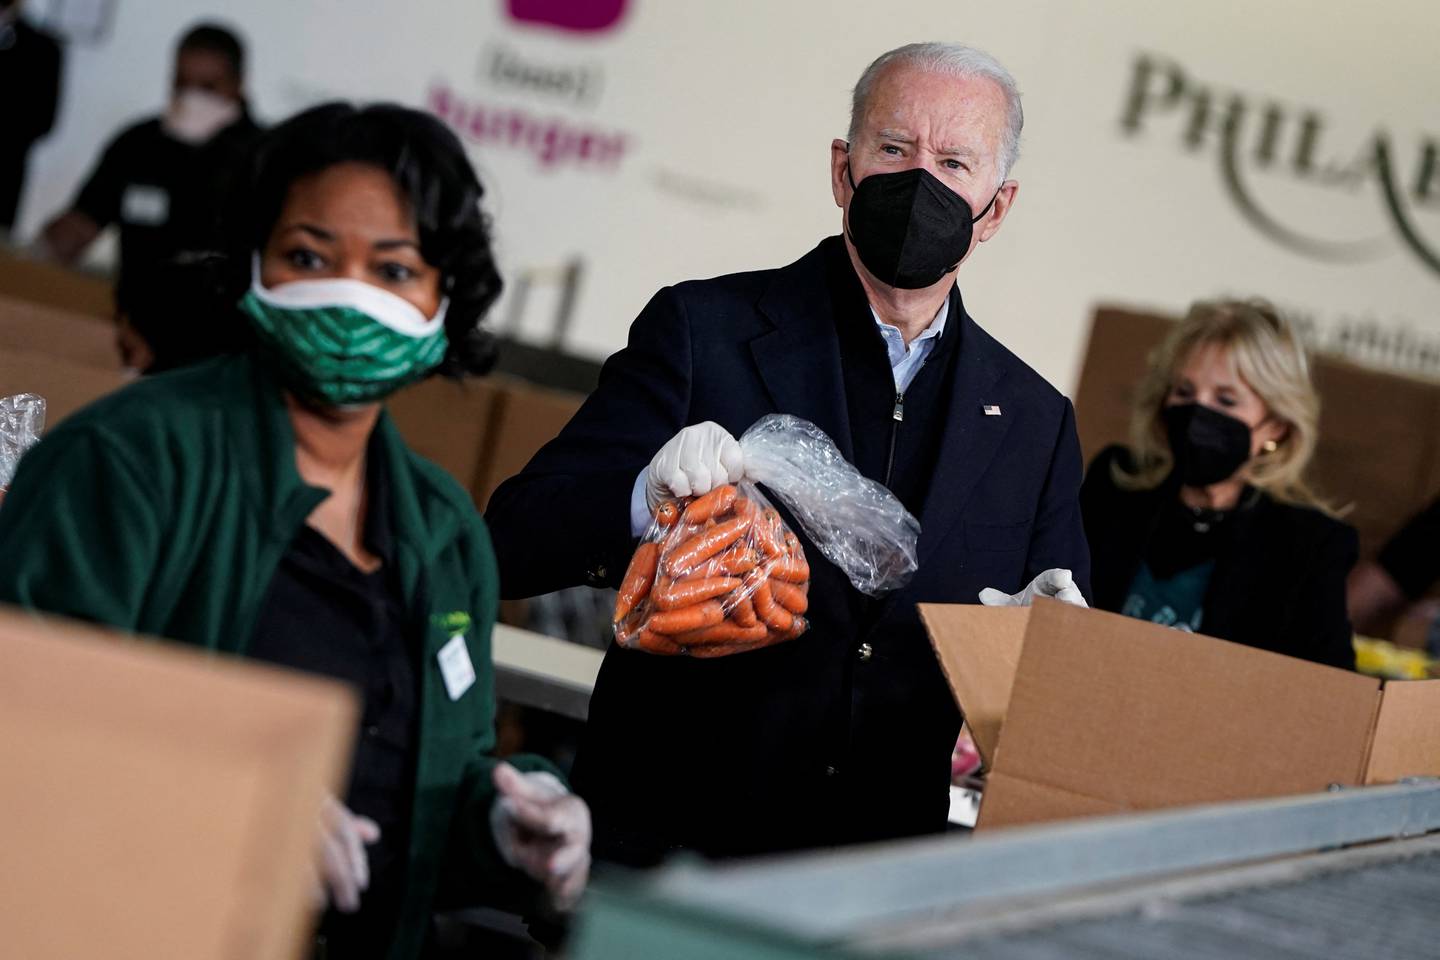 US President Joe Biden puts a bag of carrots into a box at Philabundance, a hunger relief organisation in Philadelphia, US, on January 16. Reuters